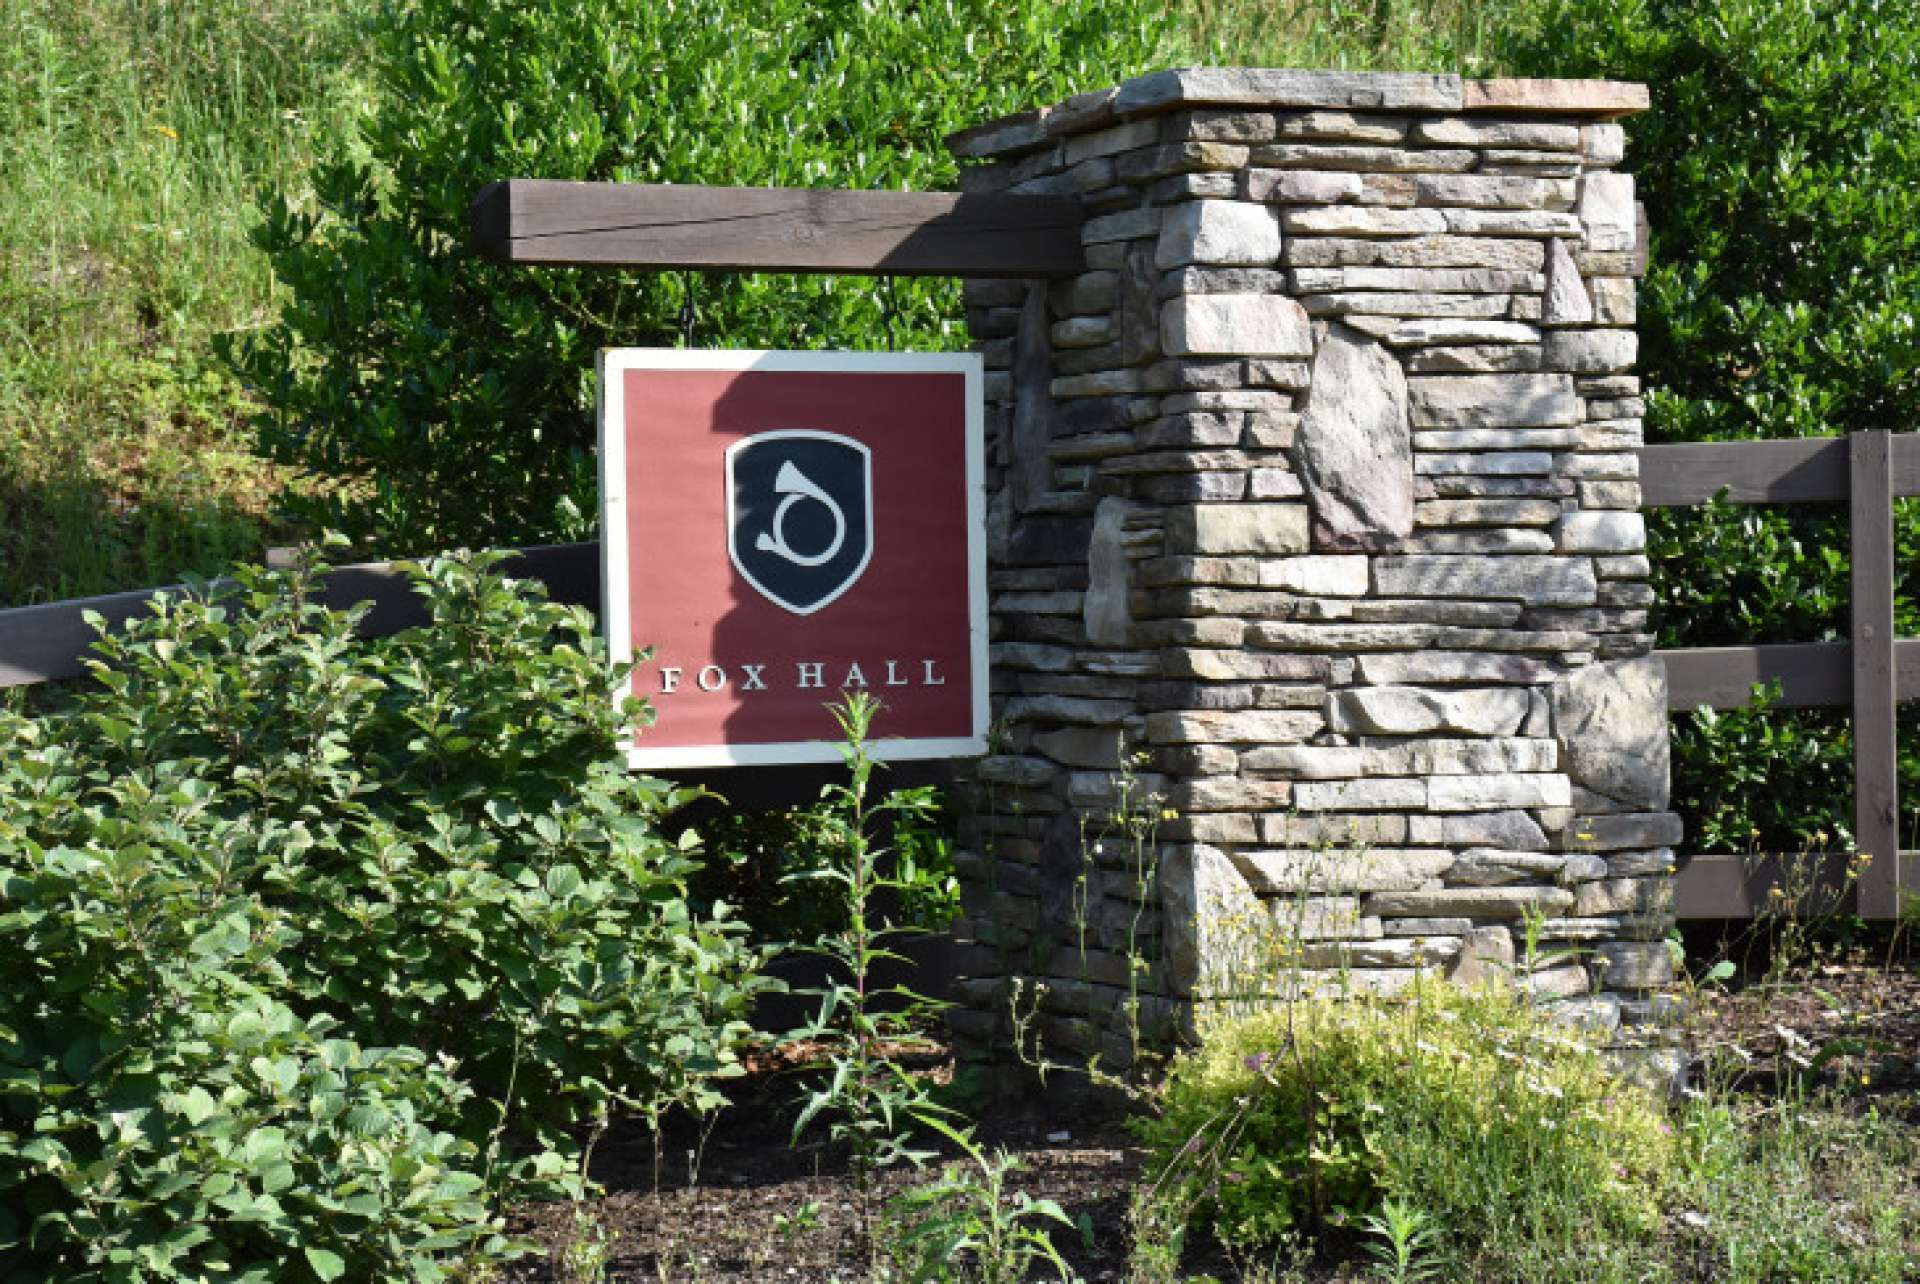 Fox Hall is a new gated community offering large building lots with mixed terrain, gorgeous views of the South Fork of The New River and also views of Little Peak Mountain, which is owned by the state of NC and part of the New River State Park.